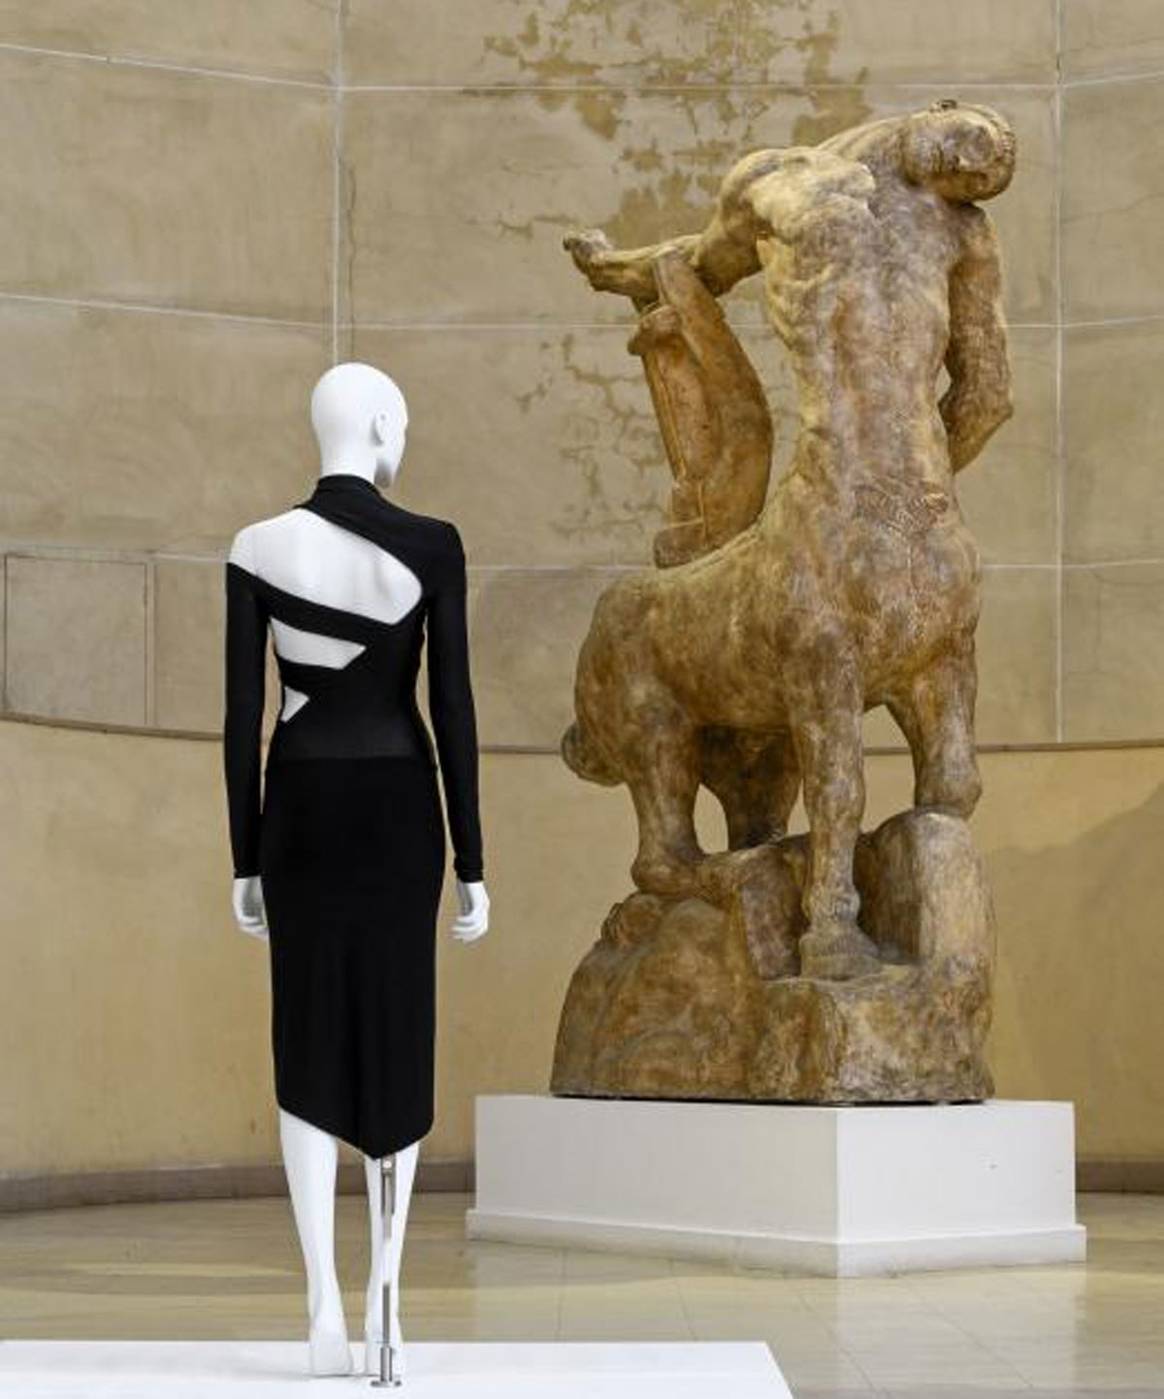 “Fashion from behind”: new exhibition in Paris has unexpected theme